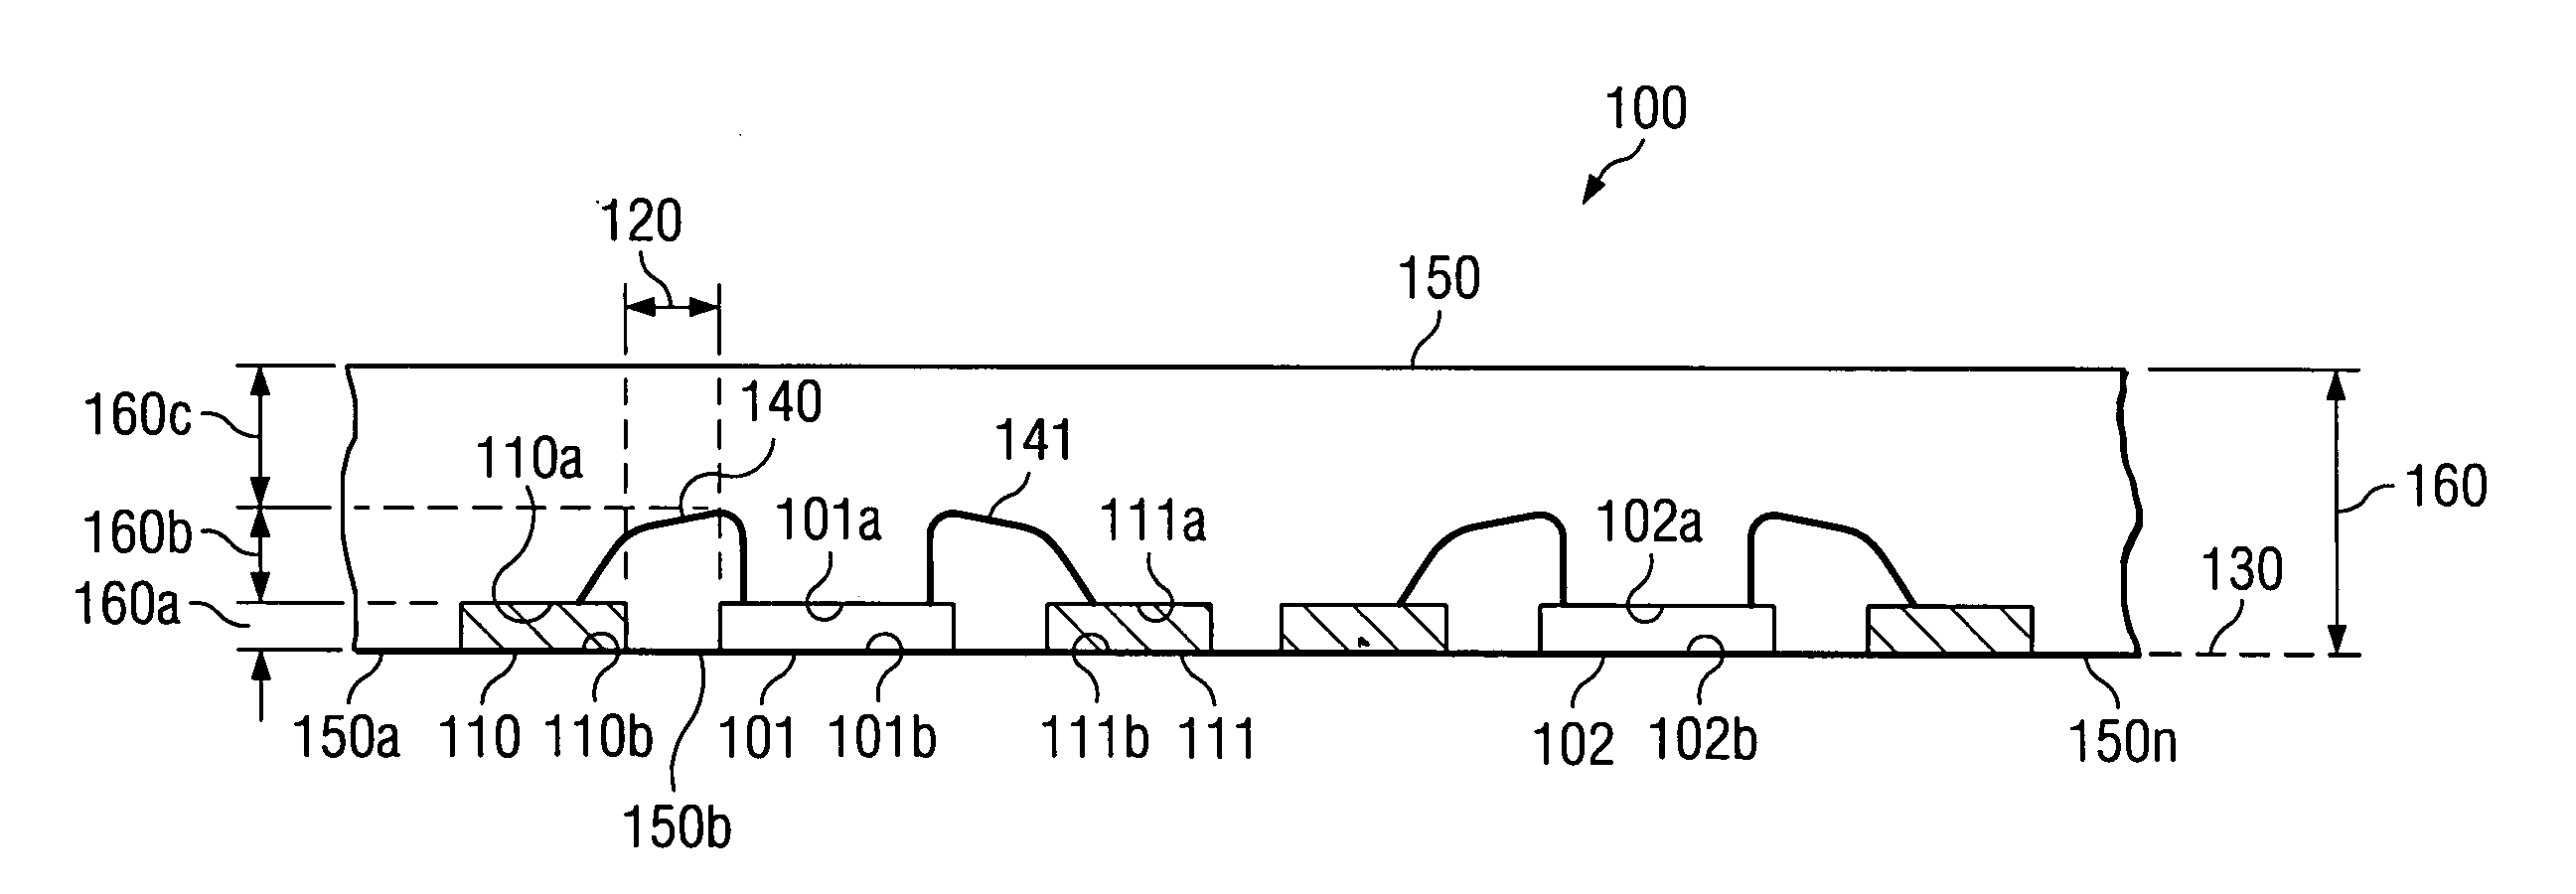 Structure and method for thin single or multichip semiconductor QFN packages